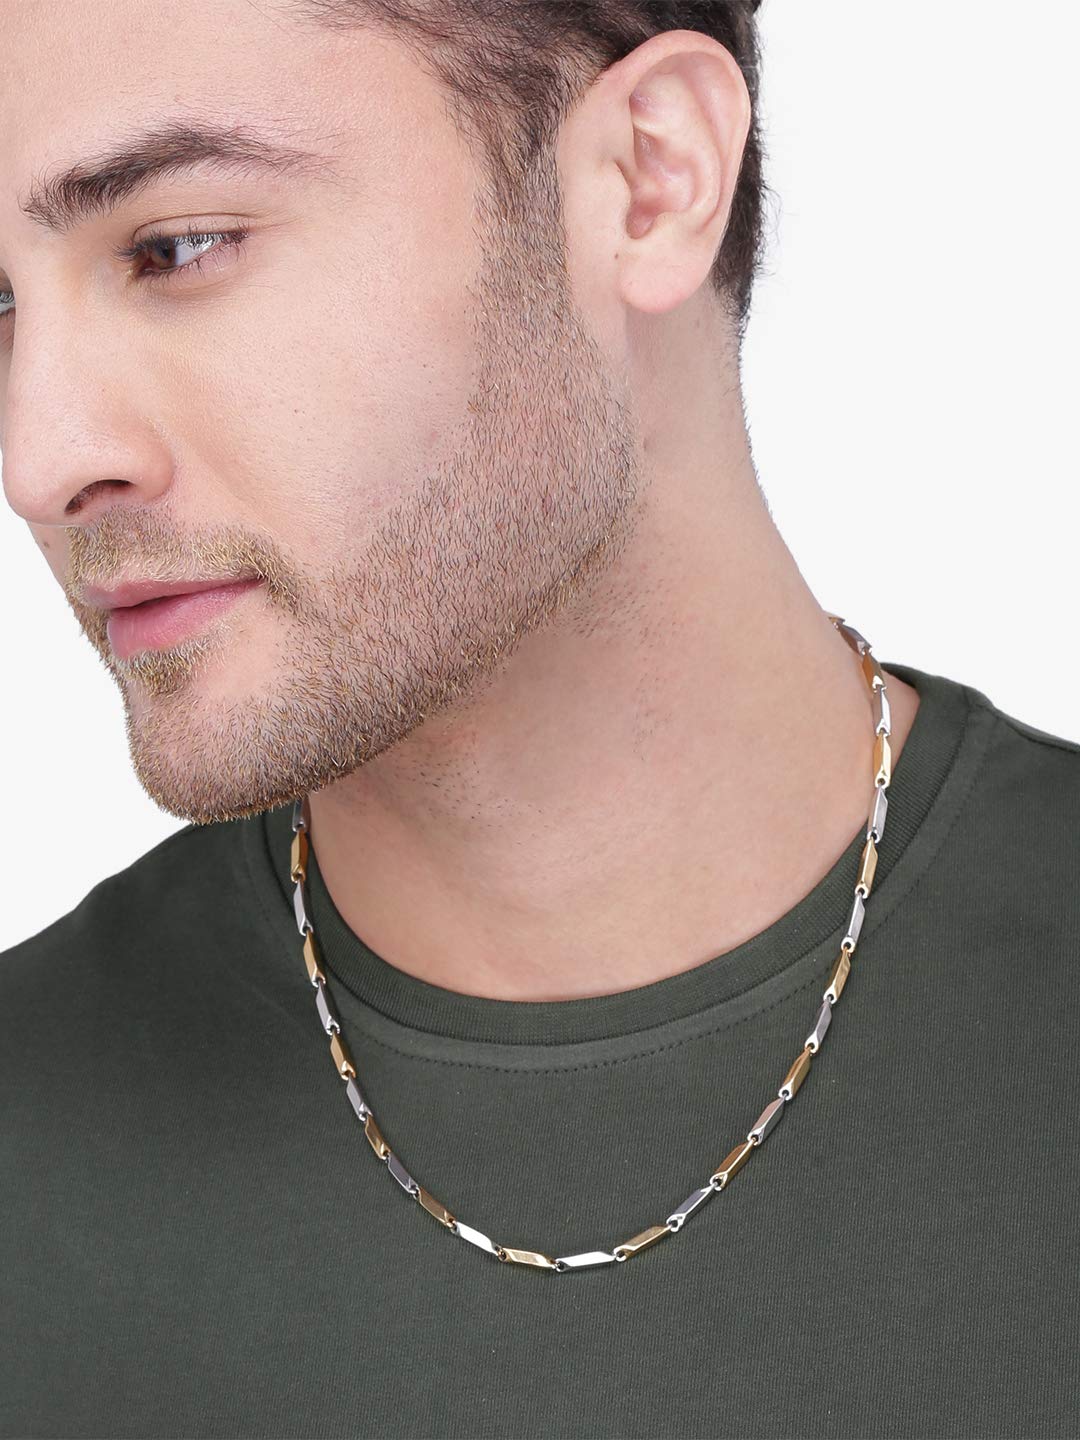 Yellow Chimes Chain for Men and Boys Gold Chain Men Rice Neck Chain for Men Silver Gold Plated | Stainless Steel Chains for Men | Birthday Gift for Men & Boys Anniversary Gift for Husband